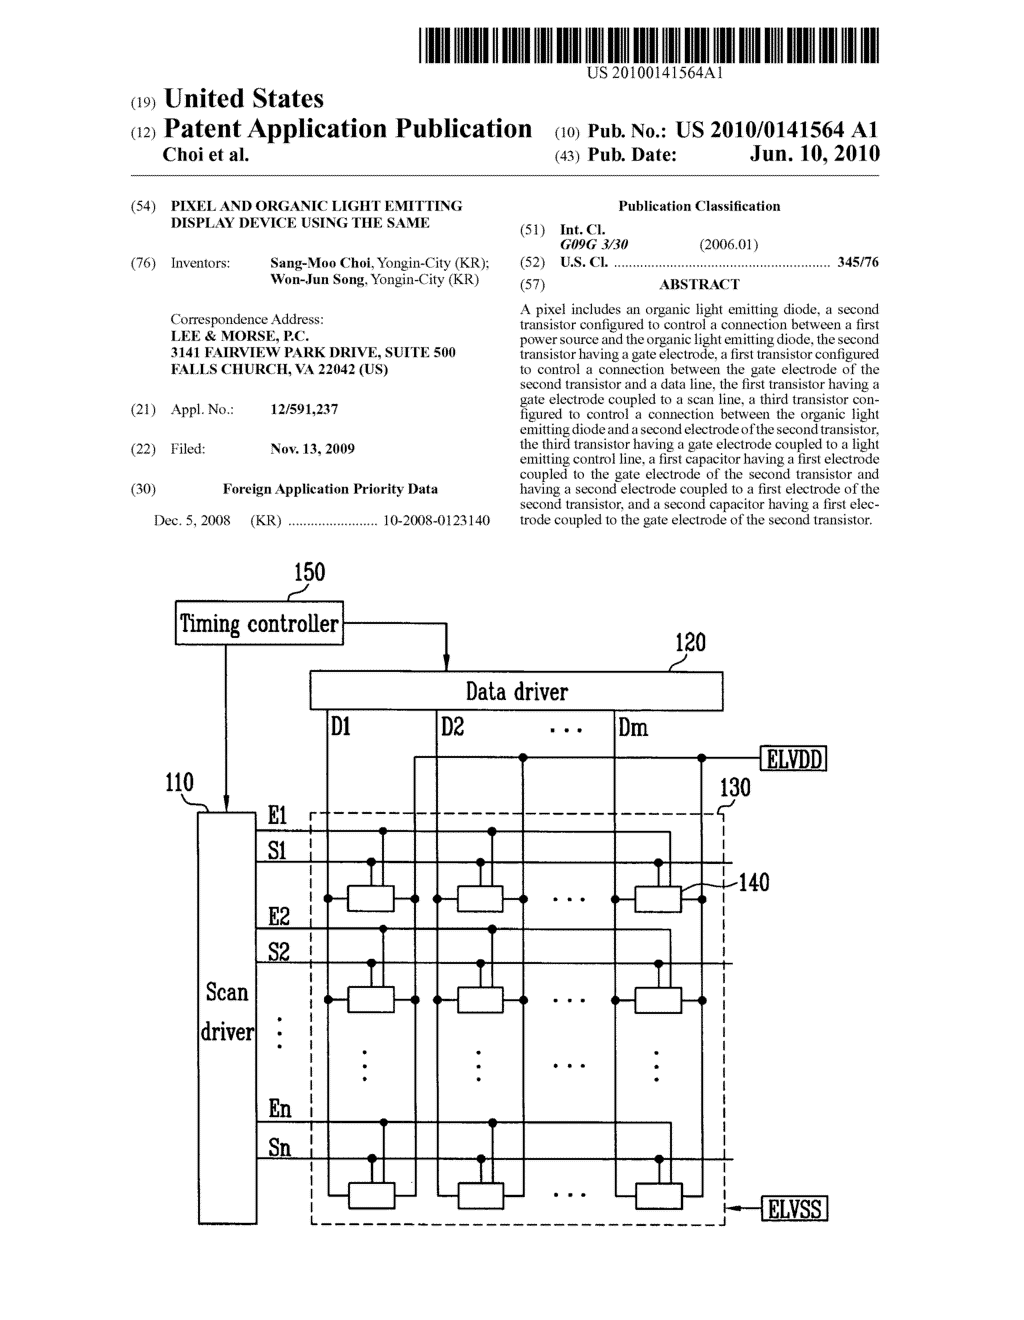 Pixel and organic light emitting display device using the same - diagram, schematic, and image 01